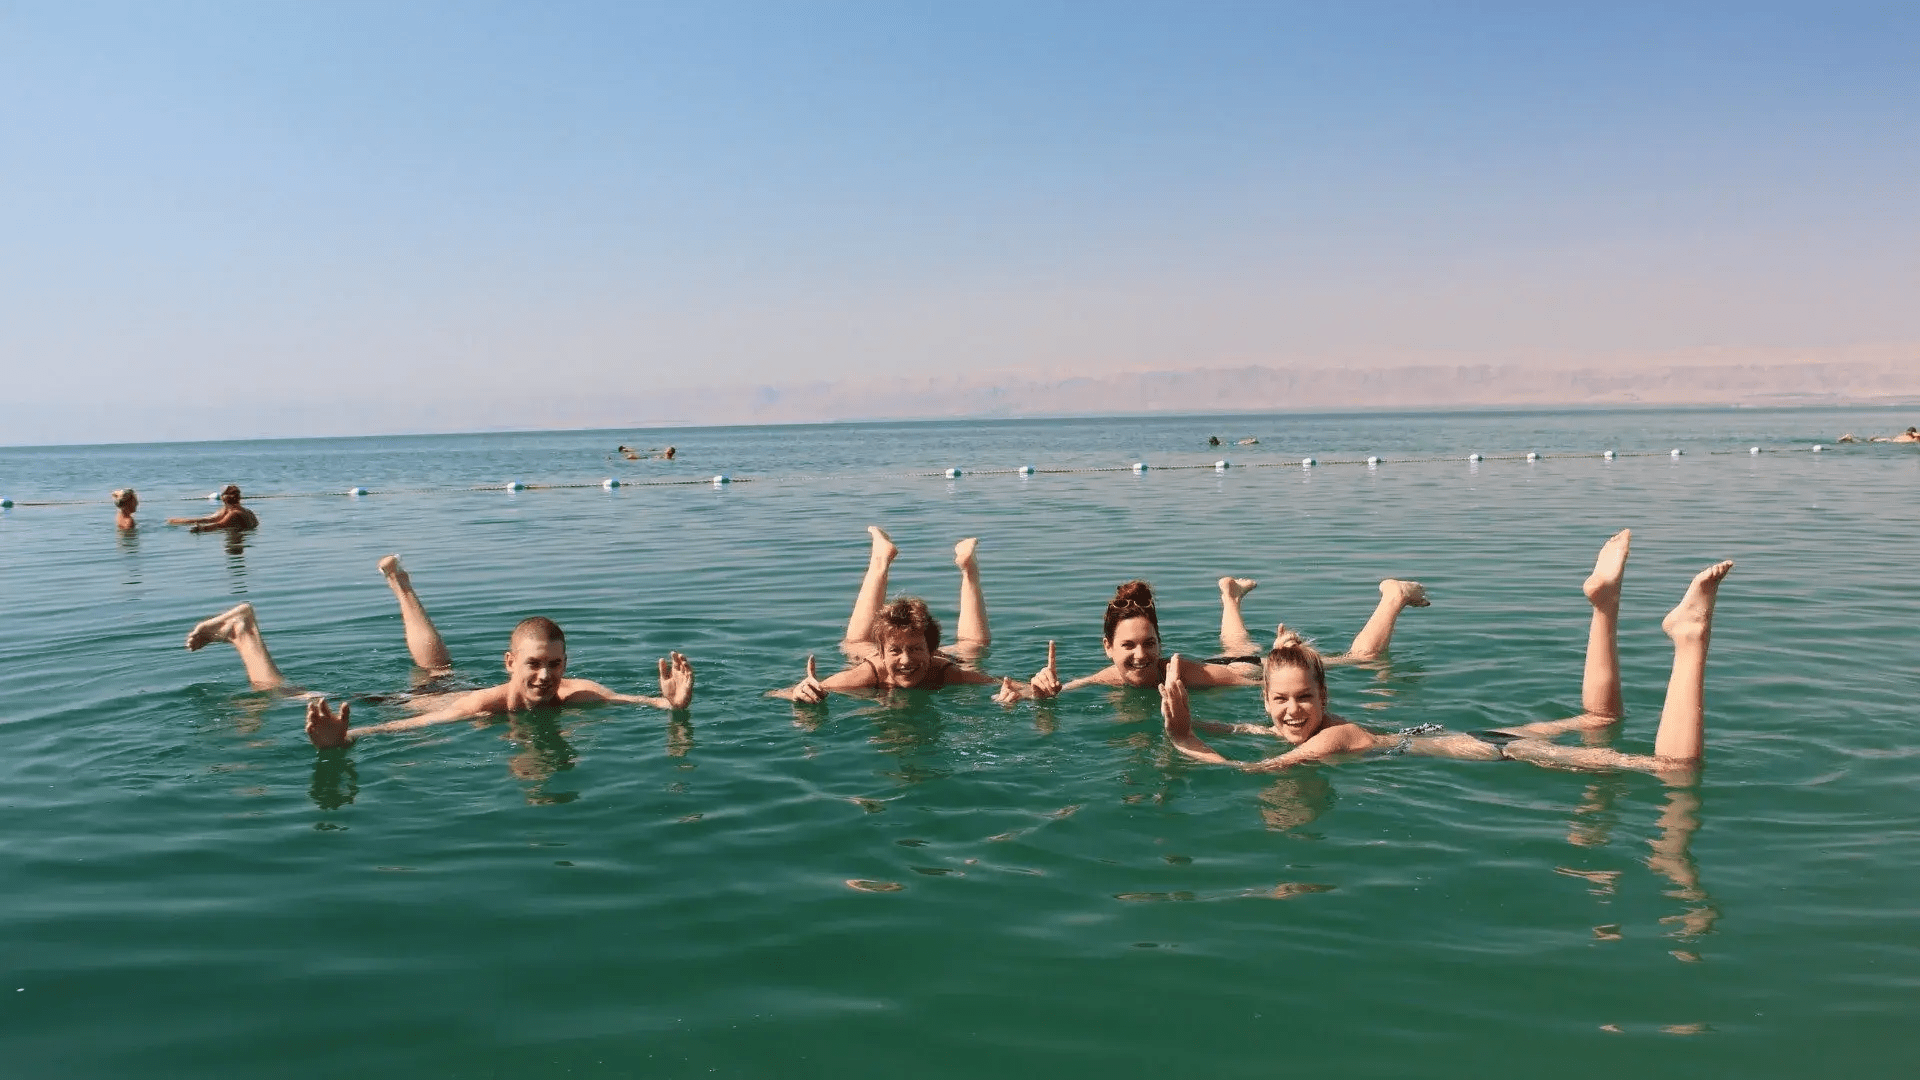 The salt concentration in the Dead Sea is believed to be around 34%